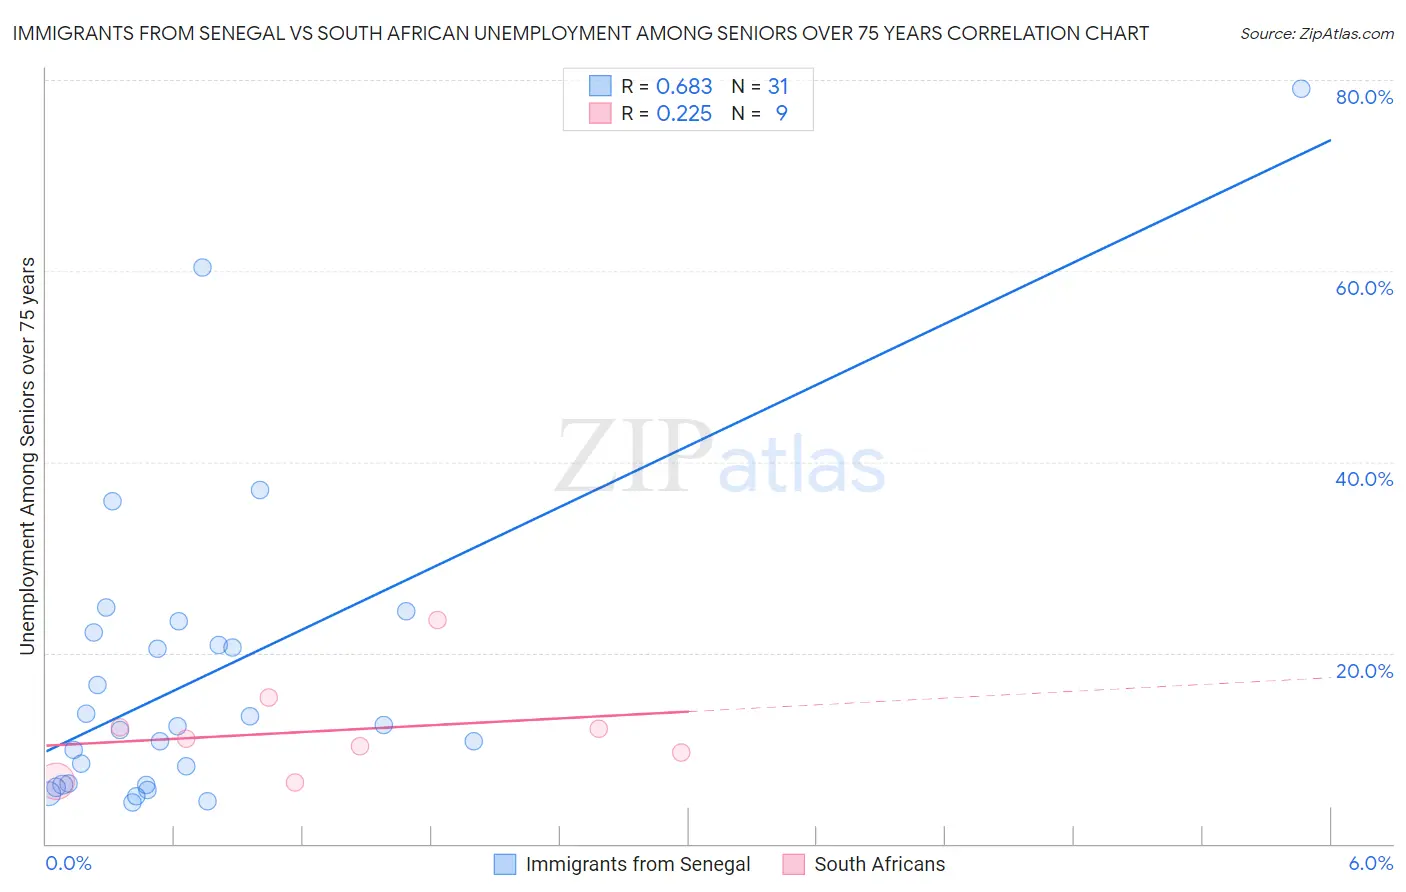 Immigrants from Senegal vs South African Unemployment Among Seniors over 75 years